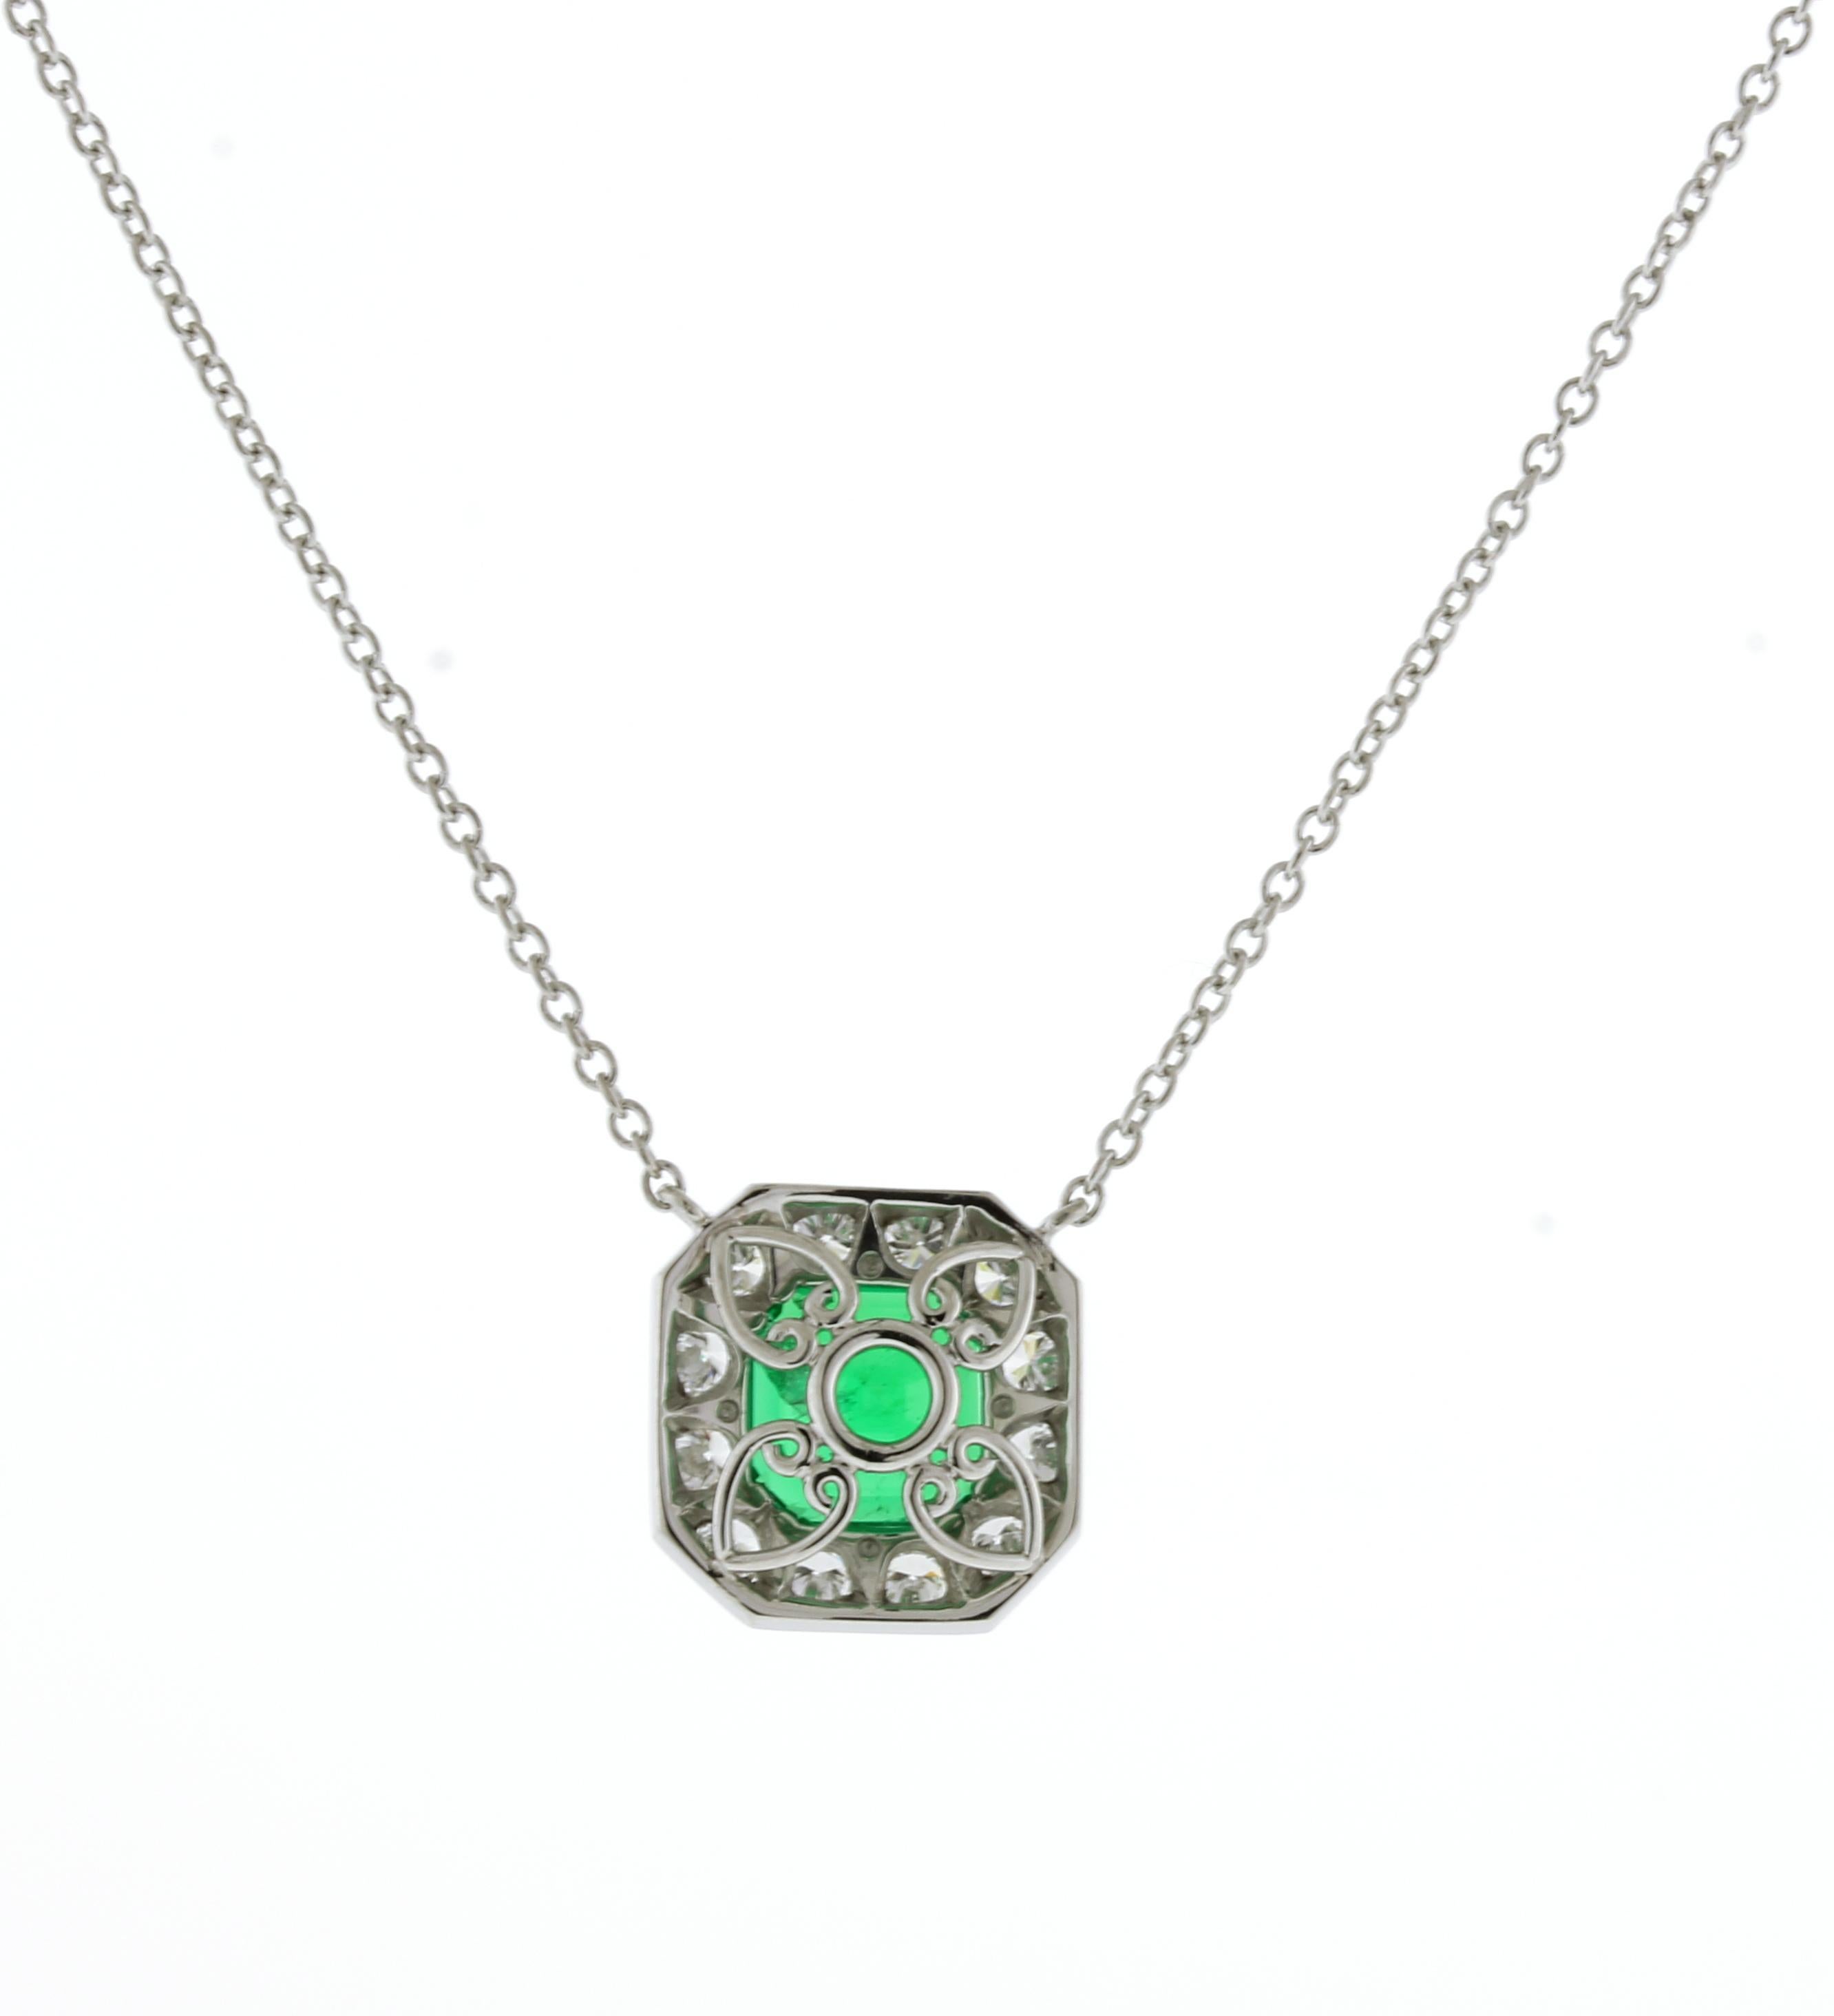 Emerald Cut Colombian Emerald and Diamond Pendant, by Pampillonia Jewelers For Sale